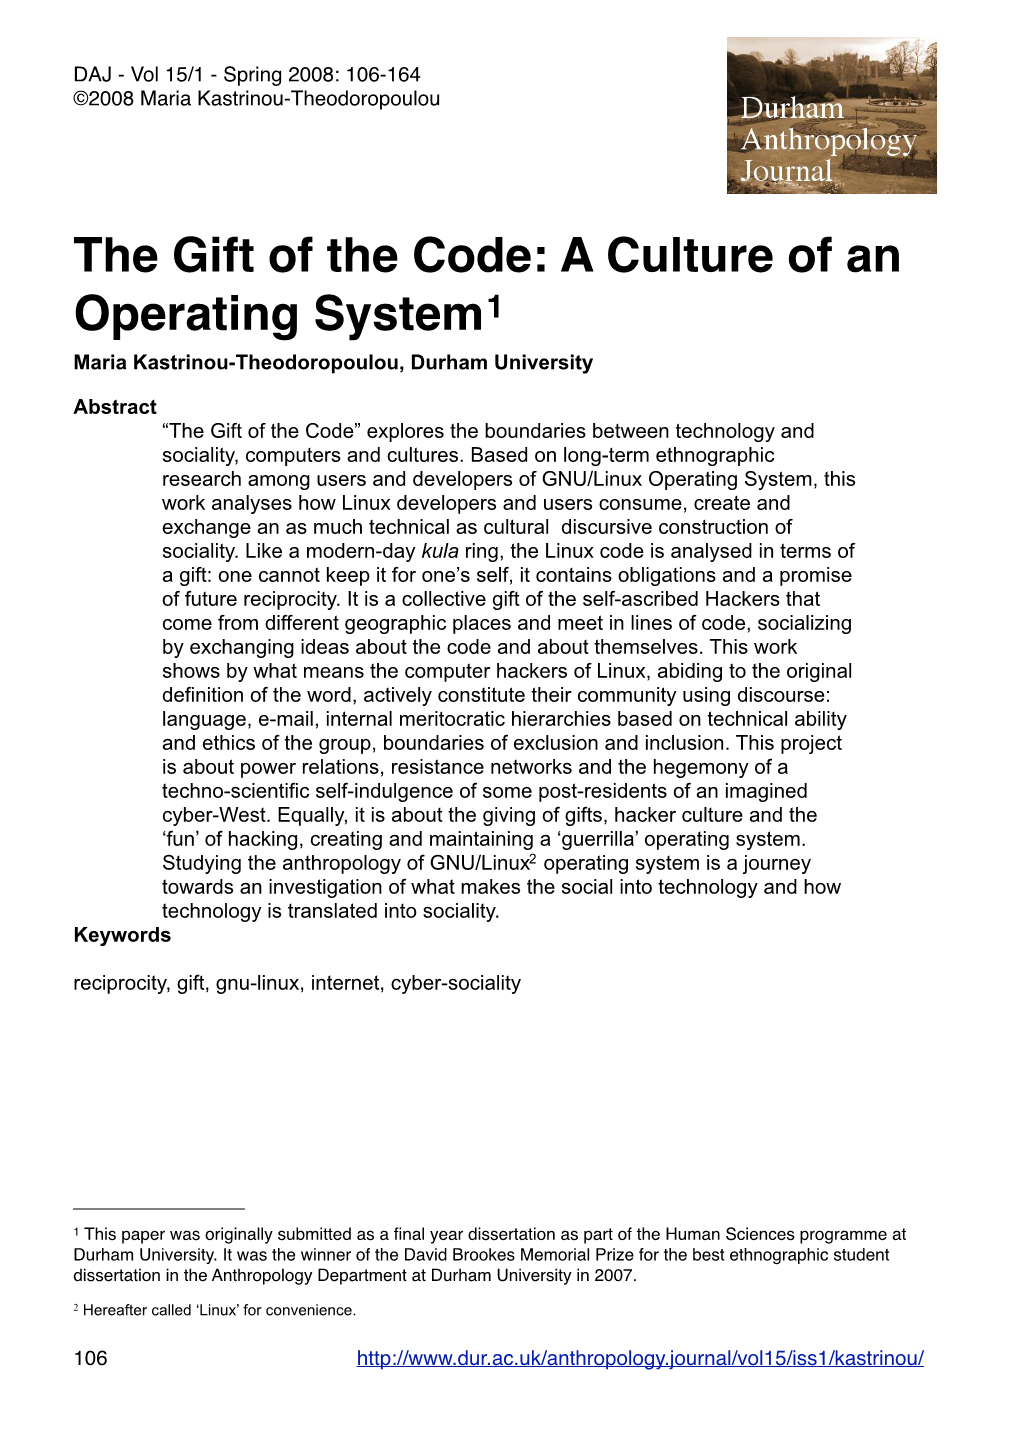 The Gift of the Code: a Culture of an Operating System1 Maria Kastrinou-Theodoropoulou, Durham University